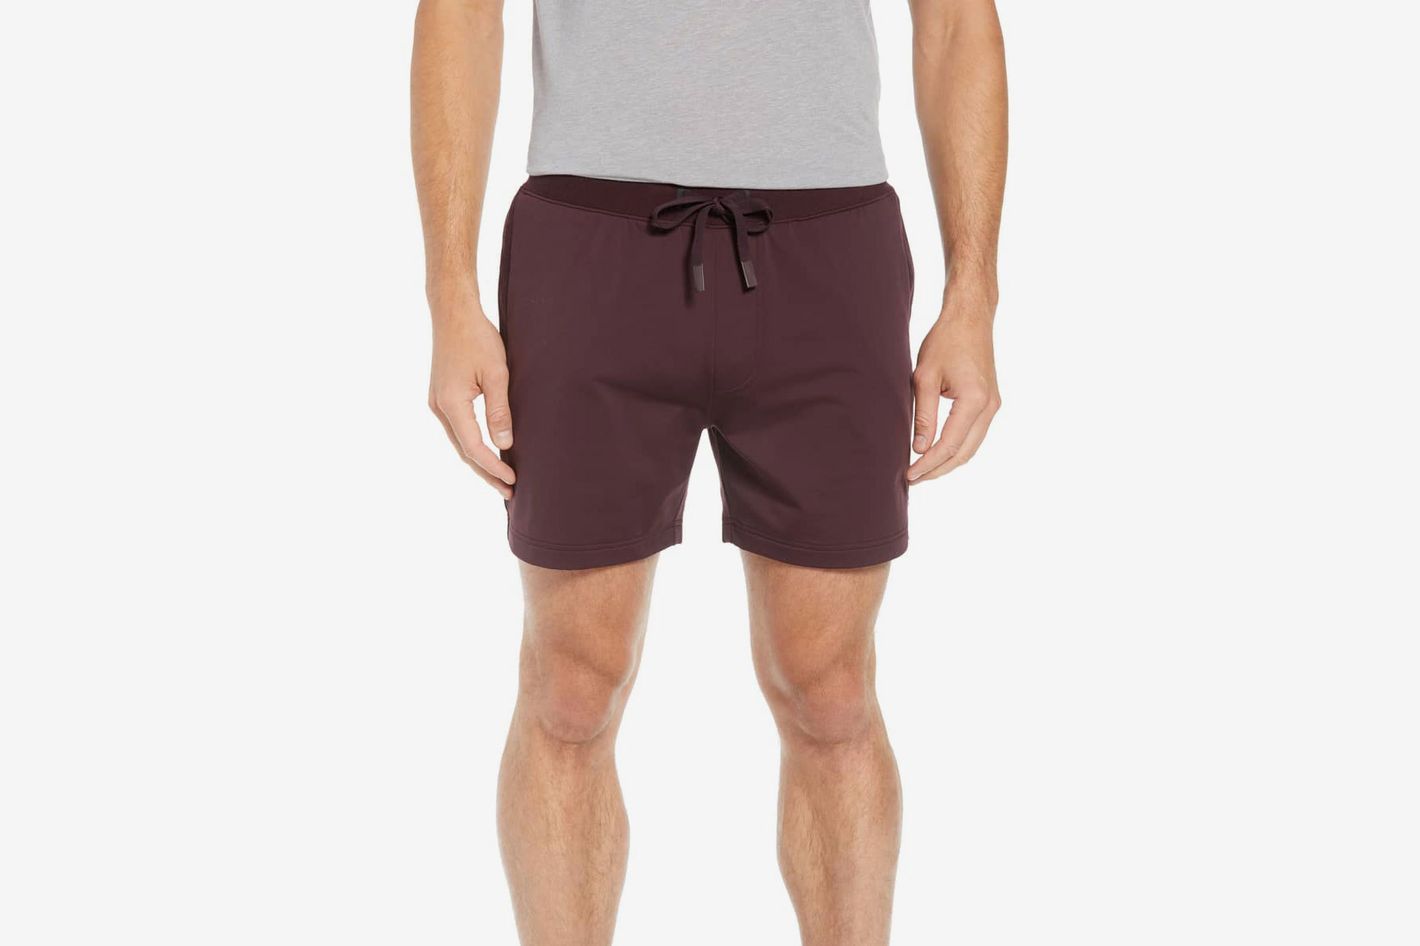 The 15 Best Yoga Clothes for Men 2019 | The Strategist | New York Magazine